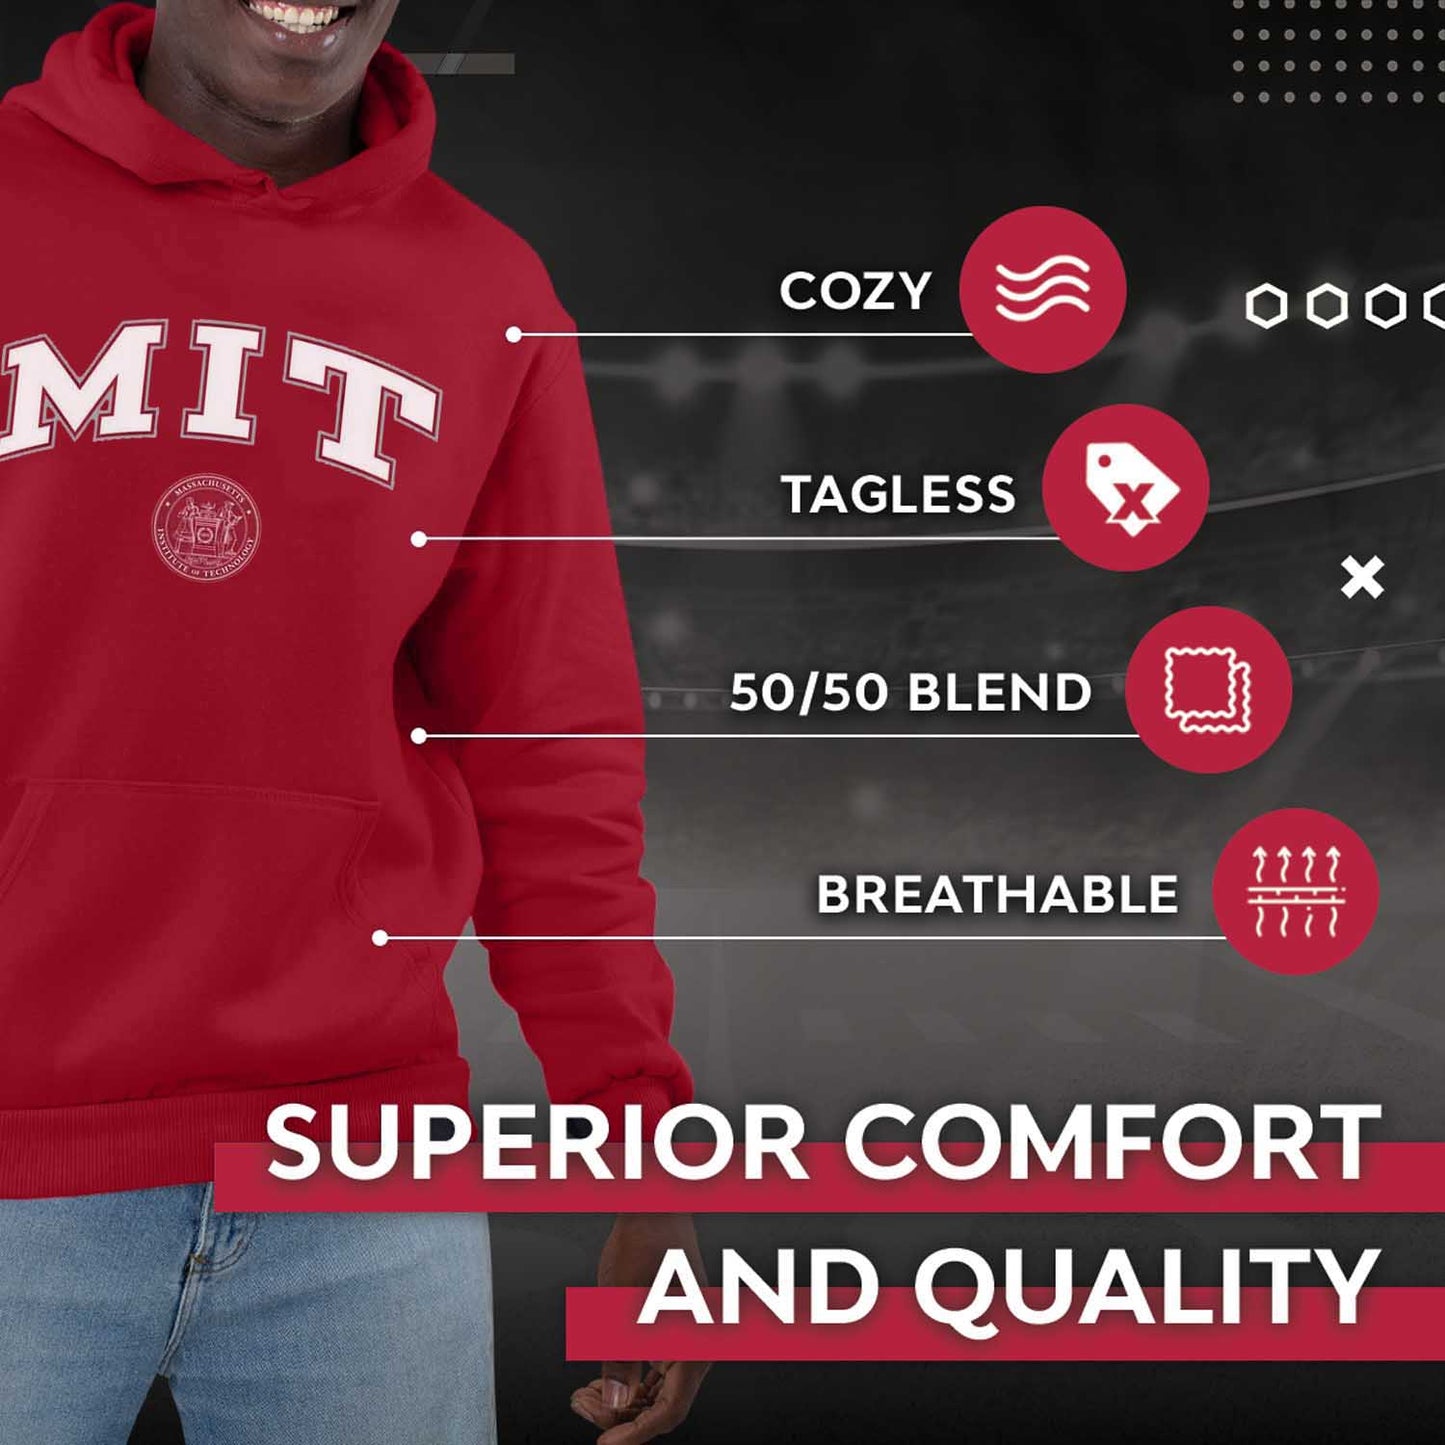 MIT Engineers Adult Arch & Logo Soft Style Gameday Hooded Sweatshirt - Cardinal